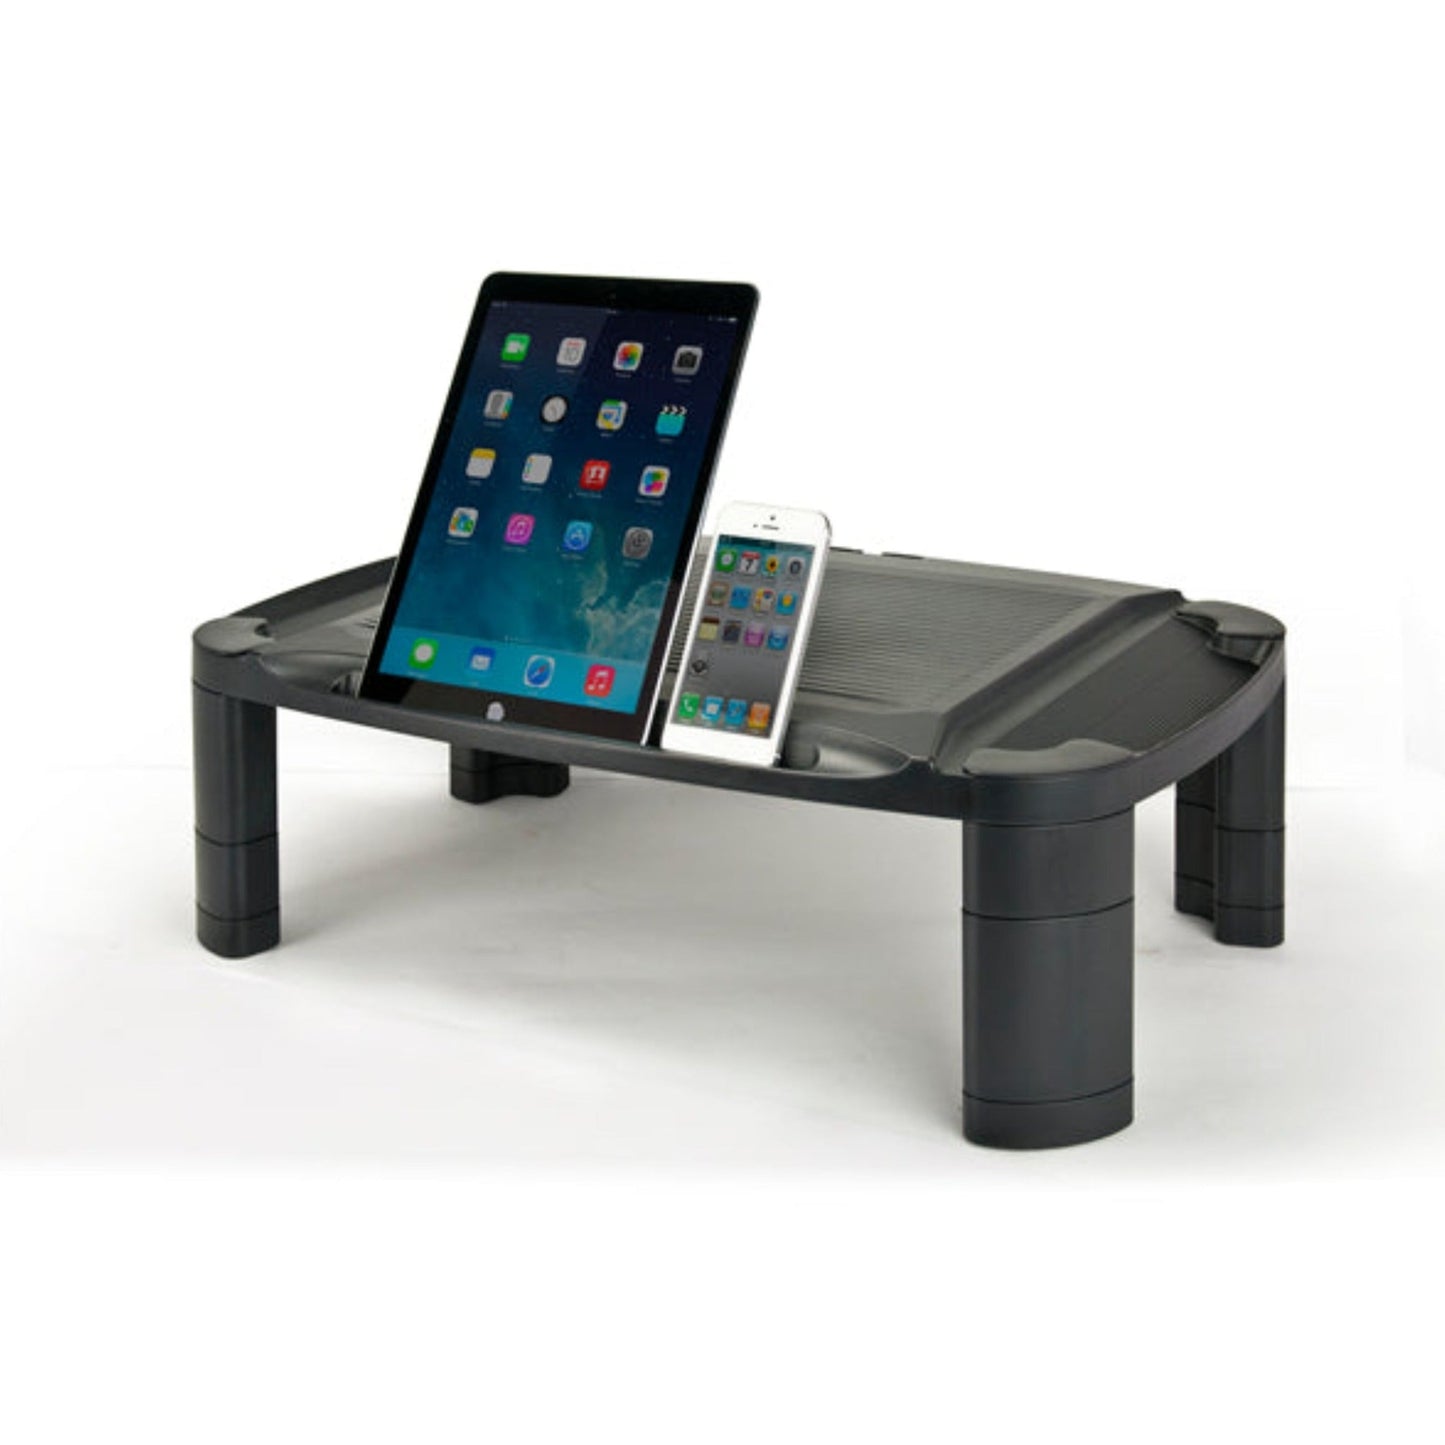 Extra Wide Professional Monitor/Printer Stand with Smart Device Slot